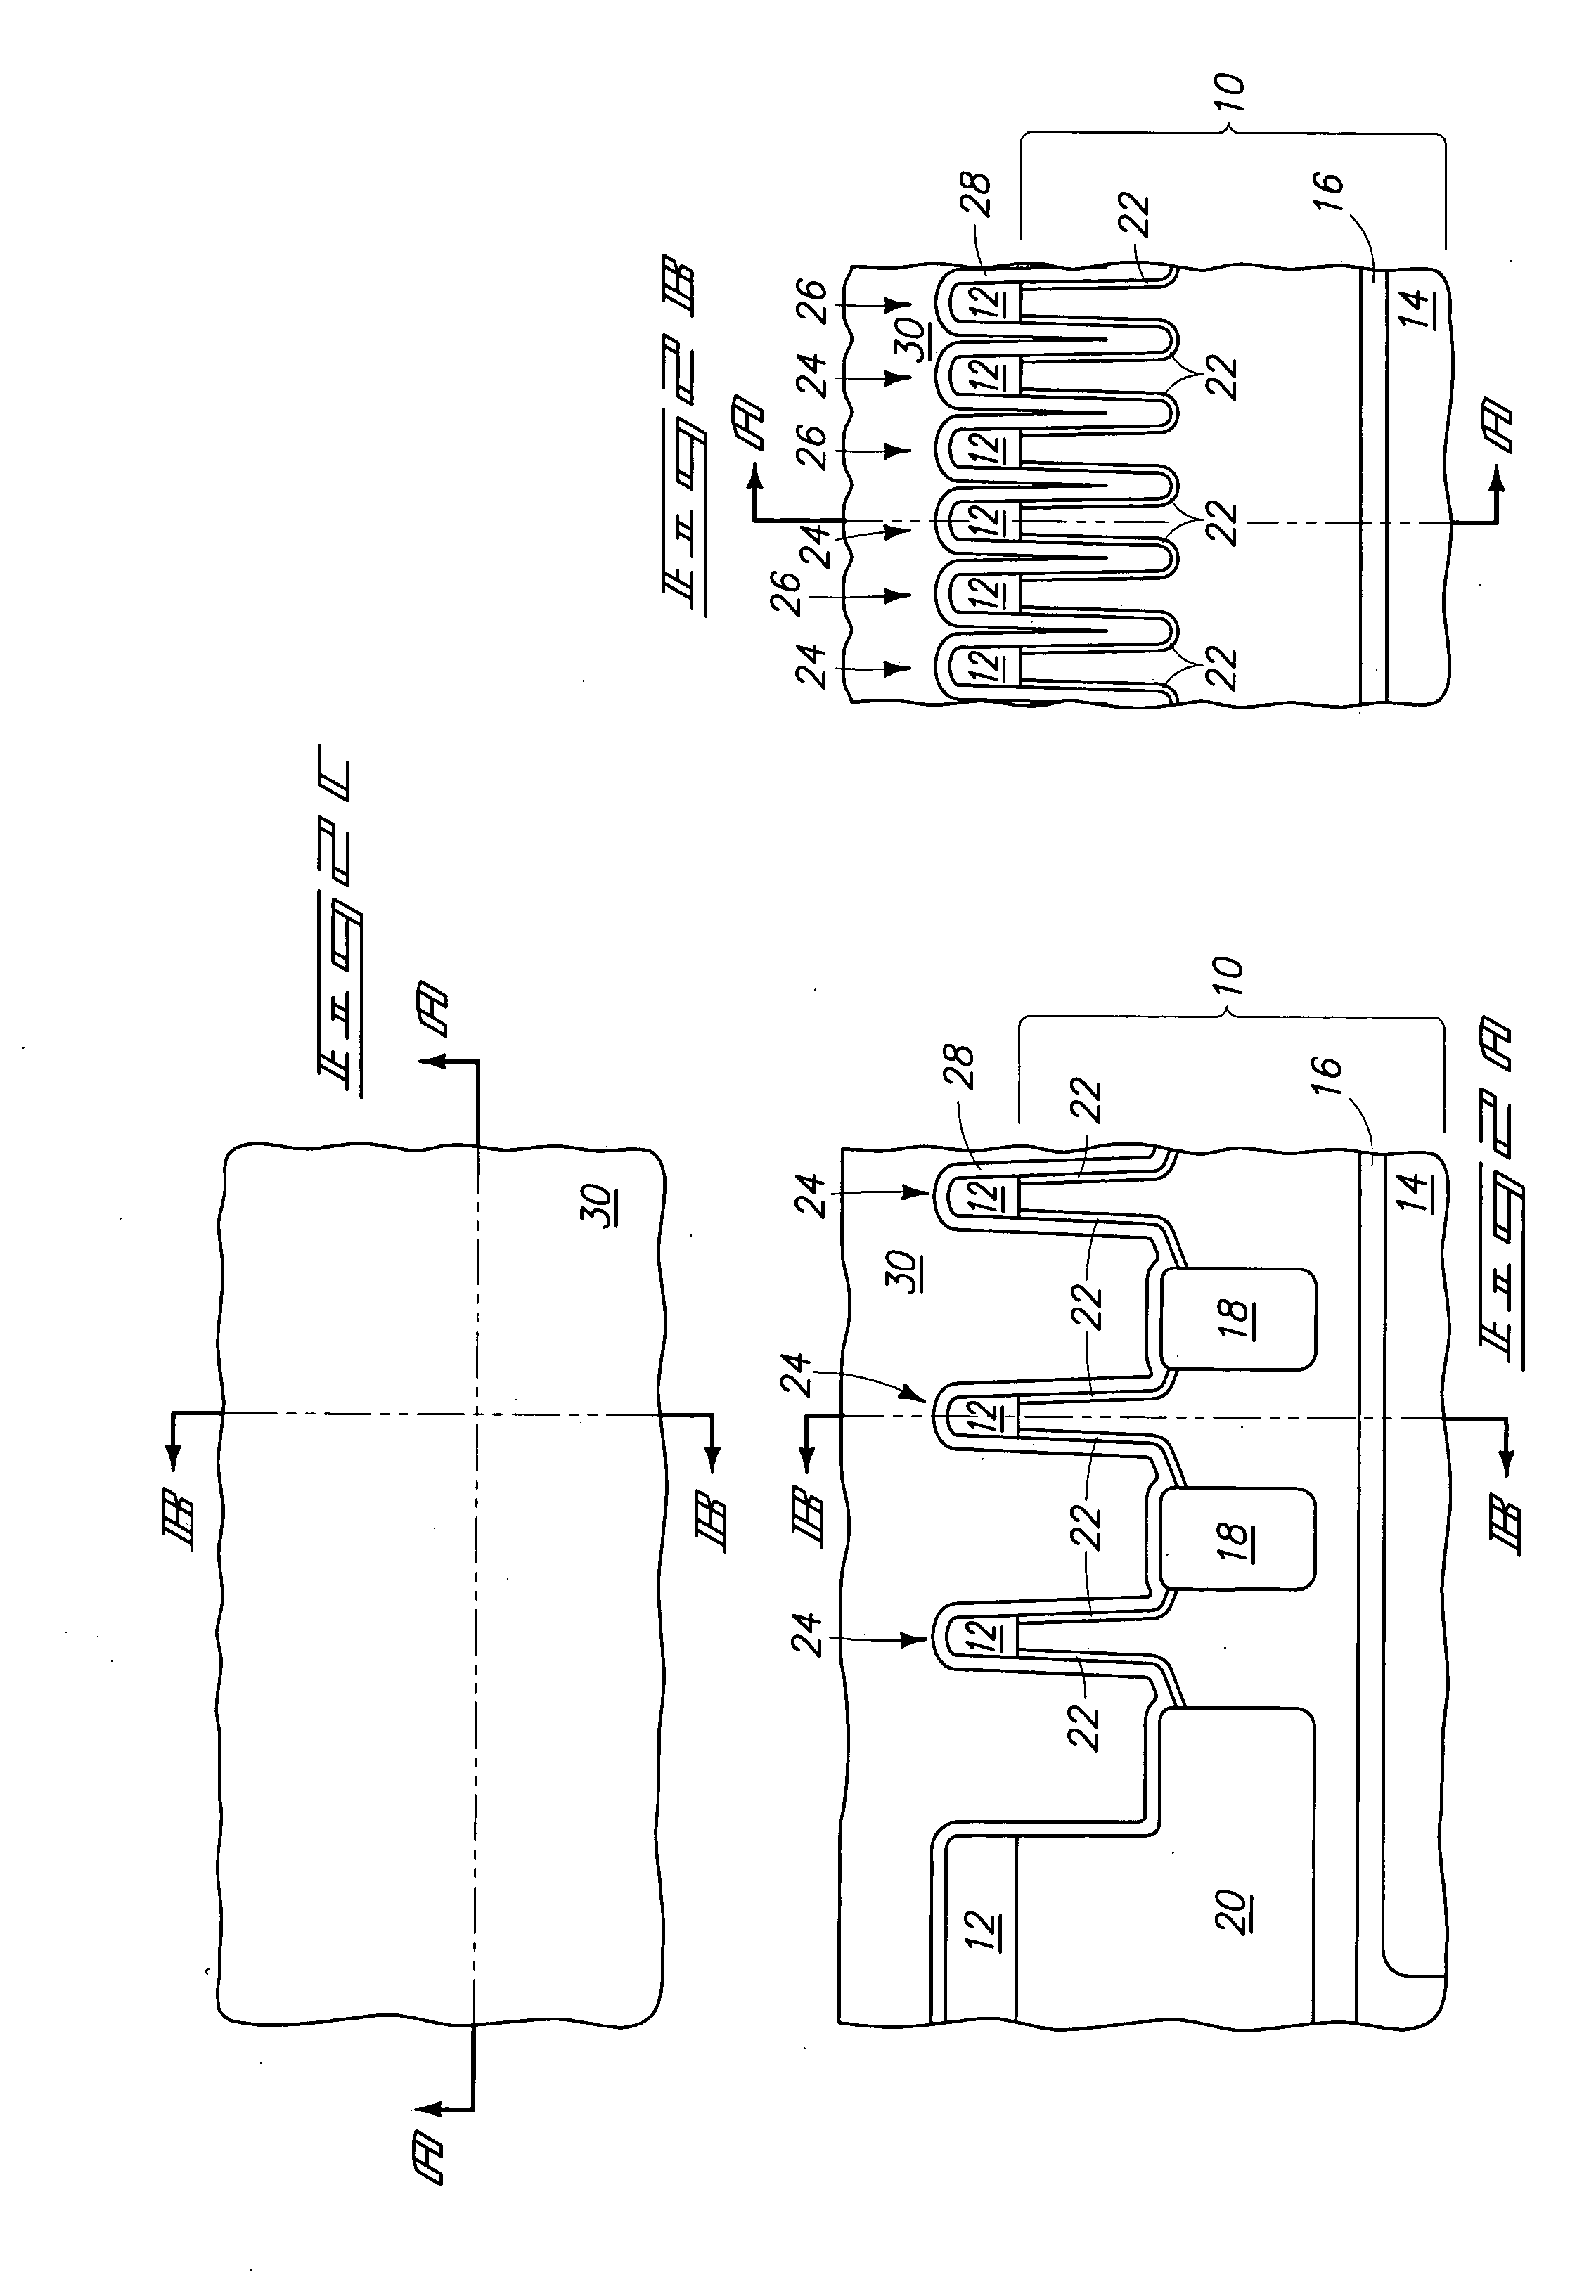 Transistor gate forming methods and transistor structures